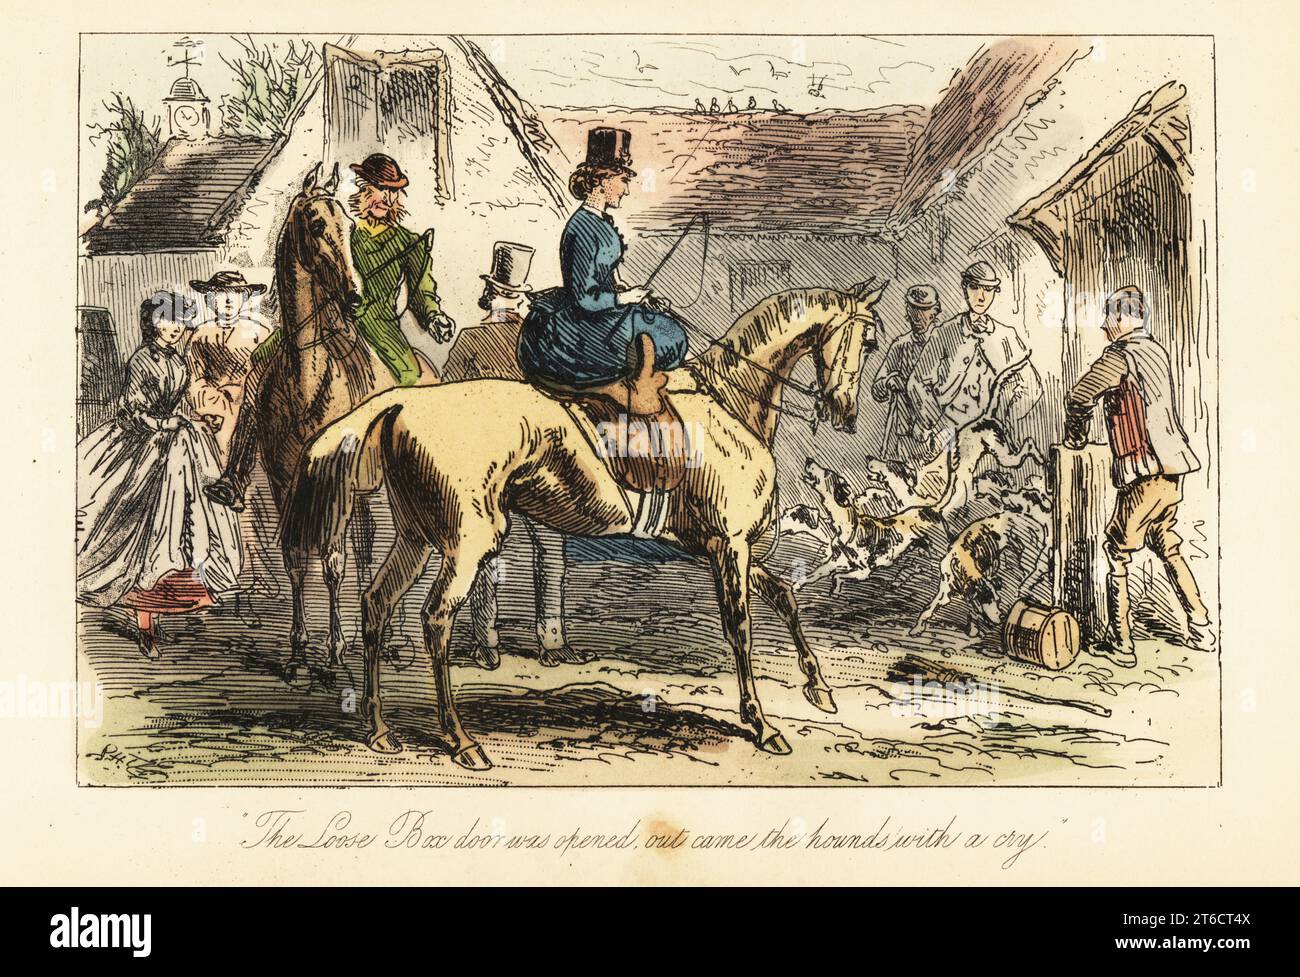 Huntsmen and women watch the fox-hounds let out of a pen before a hunt, 19th century. Facey Romford in green coat, and Lucy Somersville sidesaddle on her horse. The Loose Box door was opened, out came the hounds with a cry. Handcoloured steel engraving after an illustration by Hablot Knight Browne (Phiz) from Robert Smith Surtees Mr. Facey Romfords Hounds, Bradbury, Evans and Co., London, 1865. Stock Photo